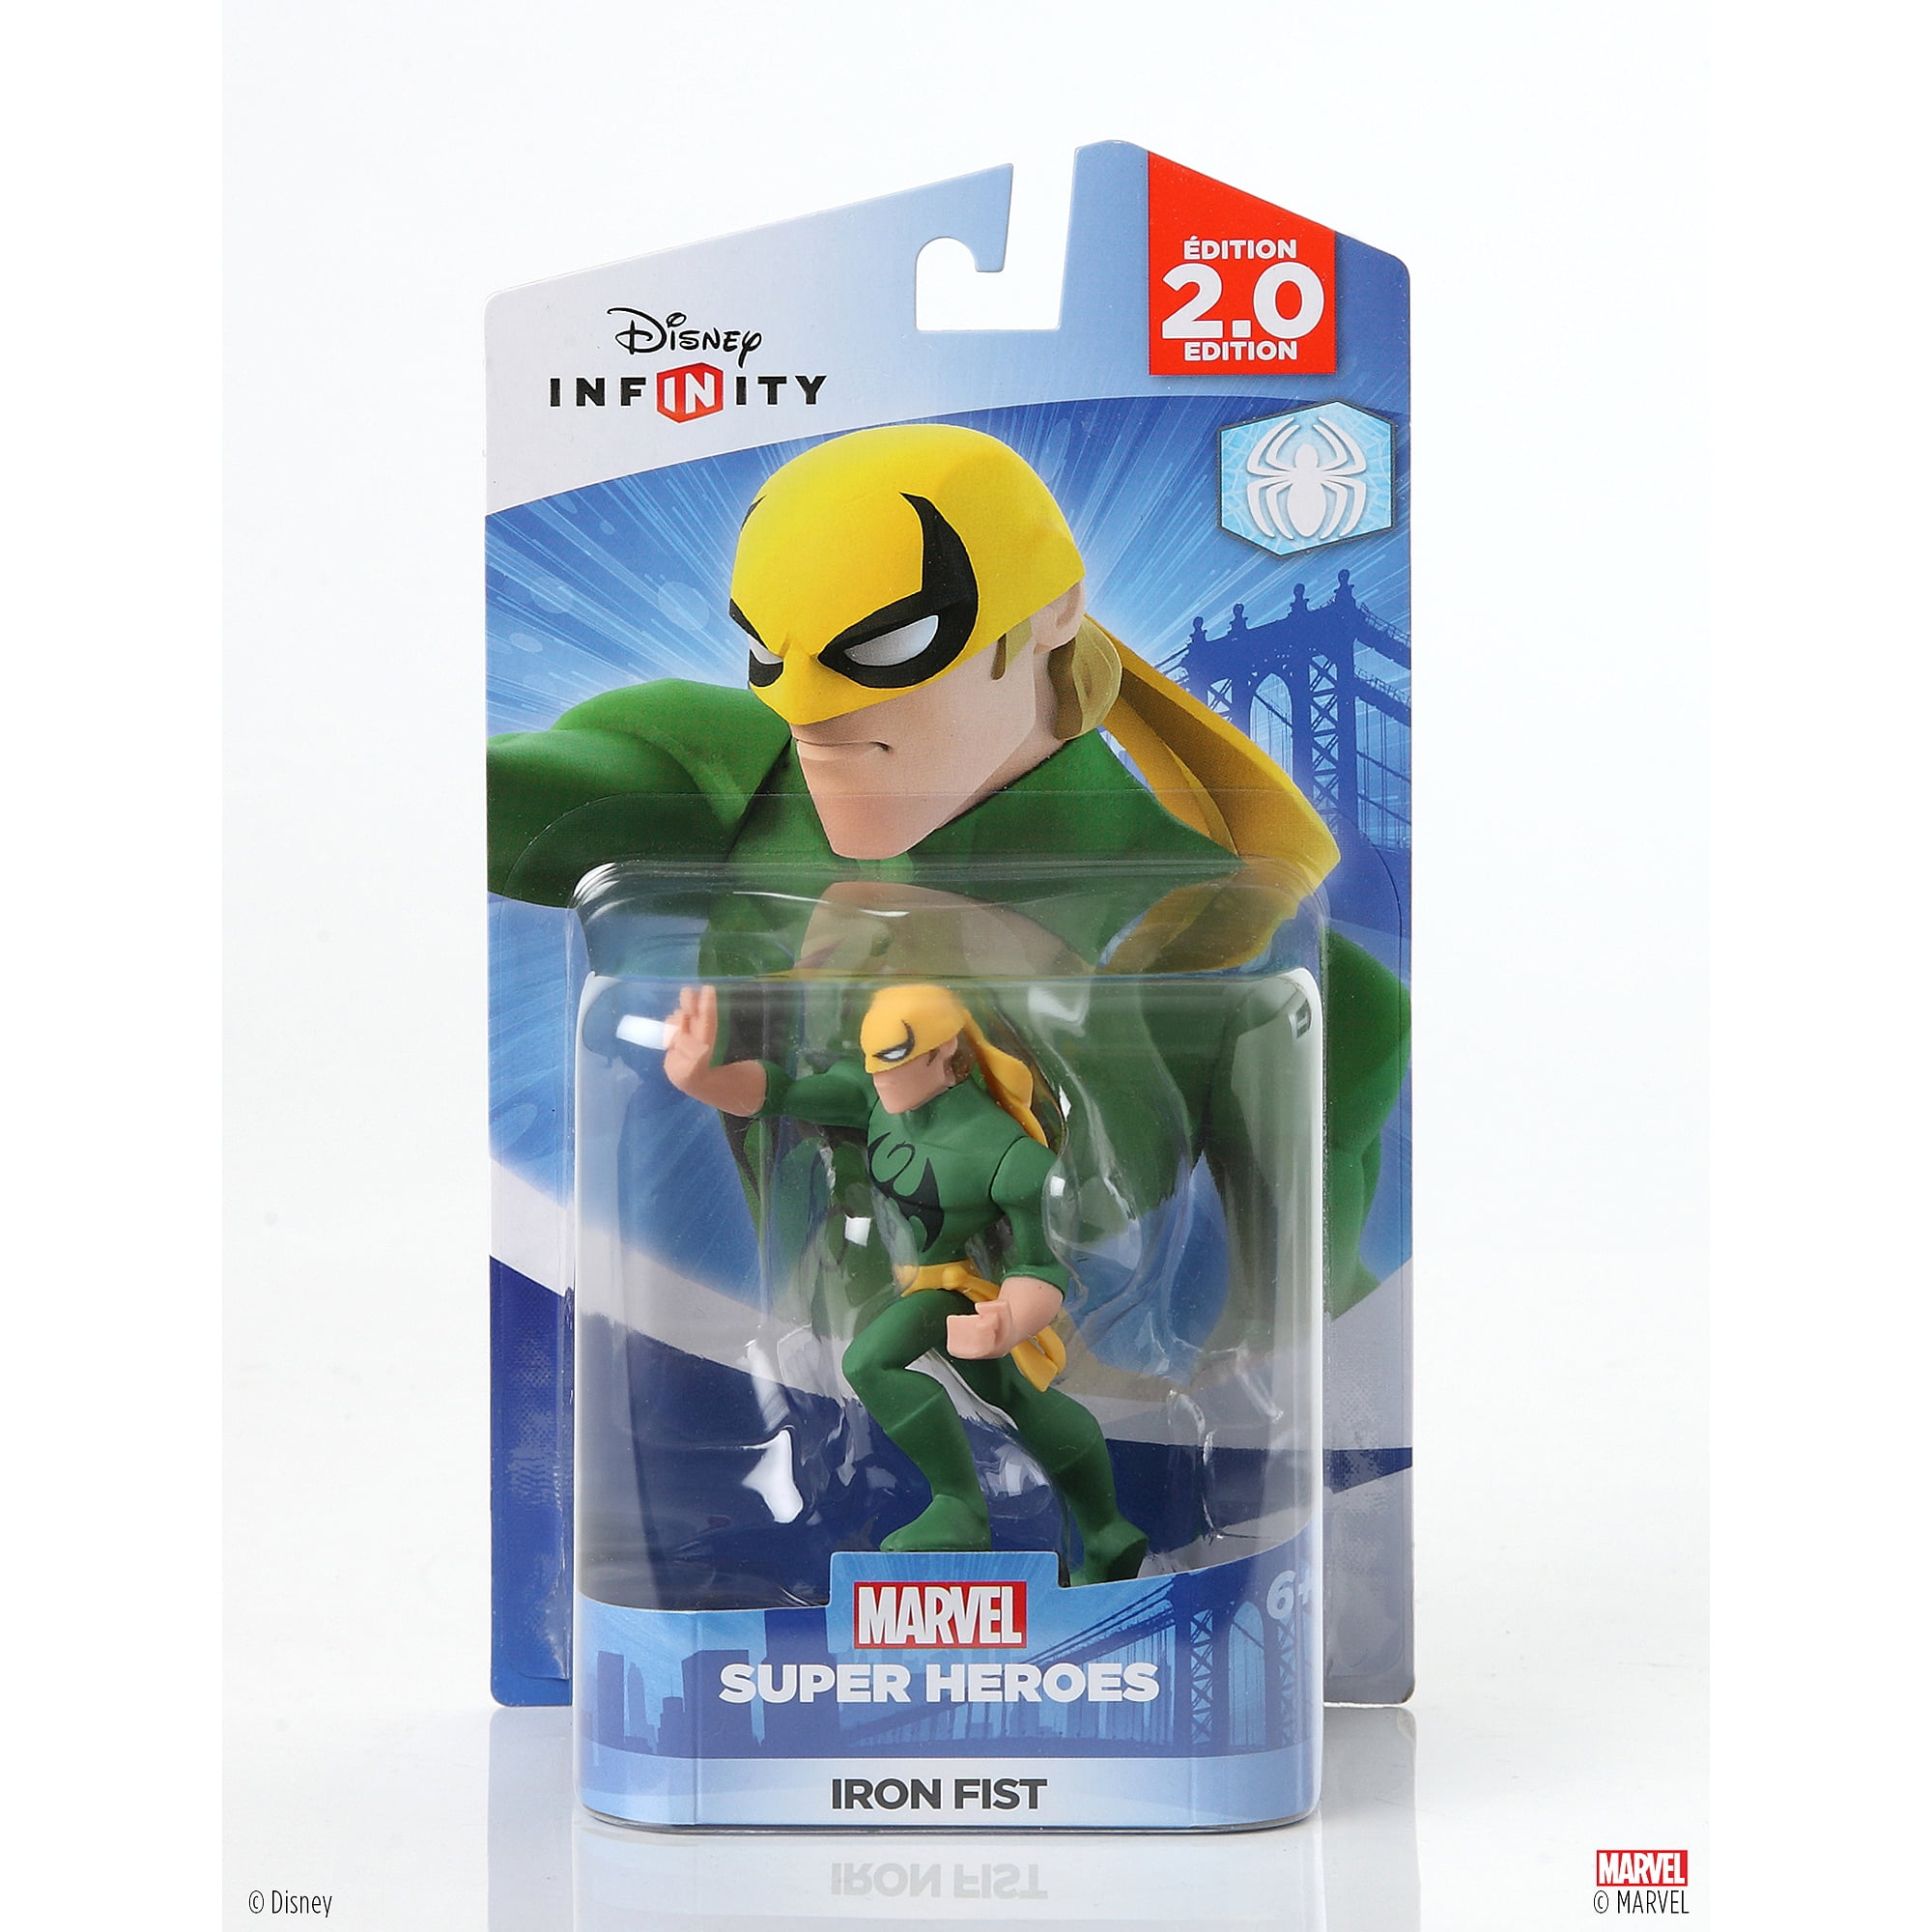 sell disney infinity characters